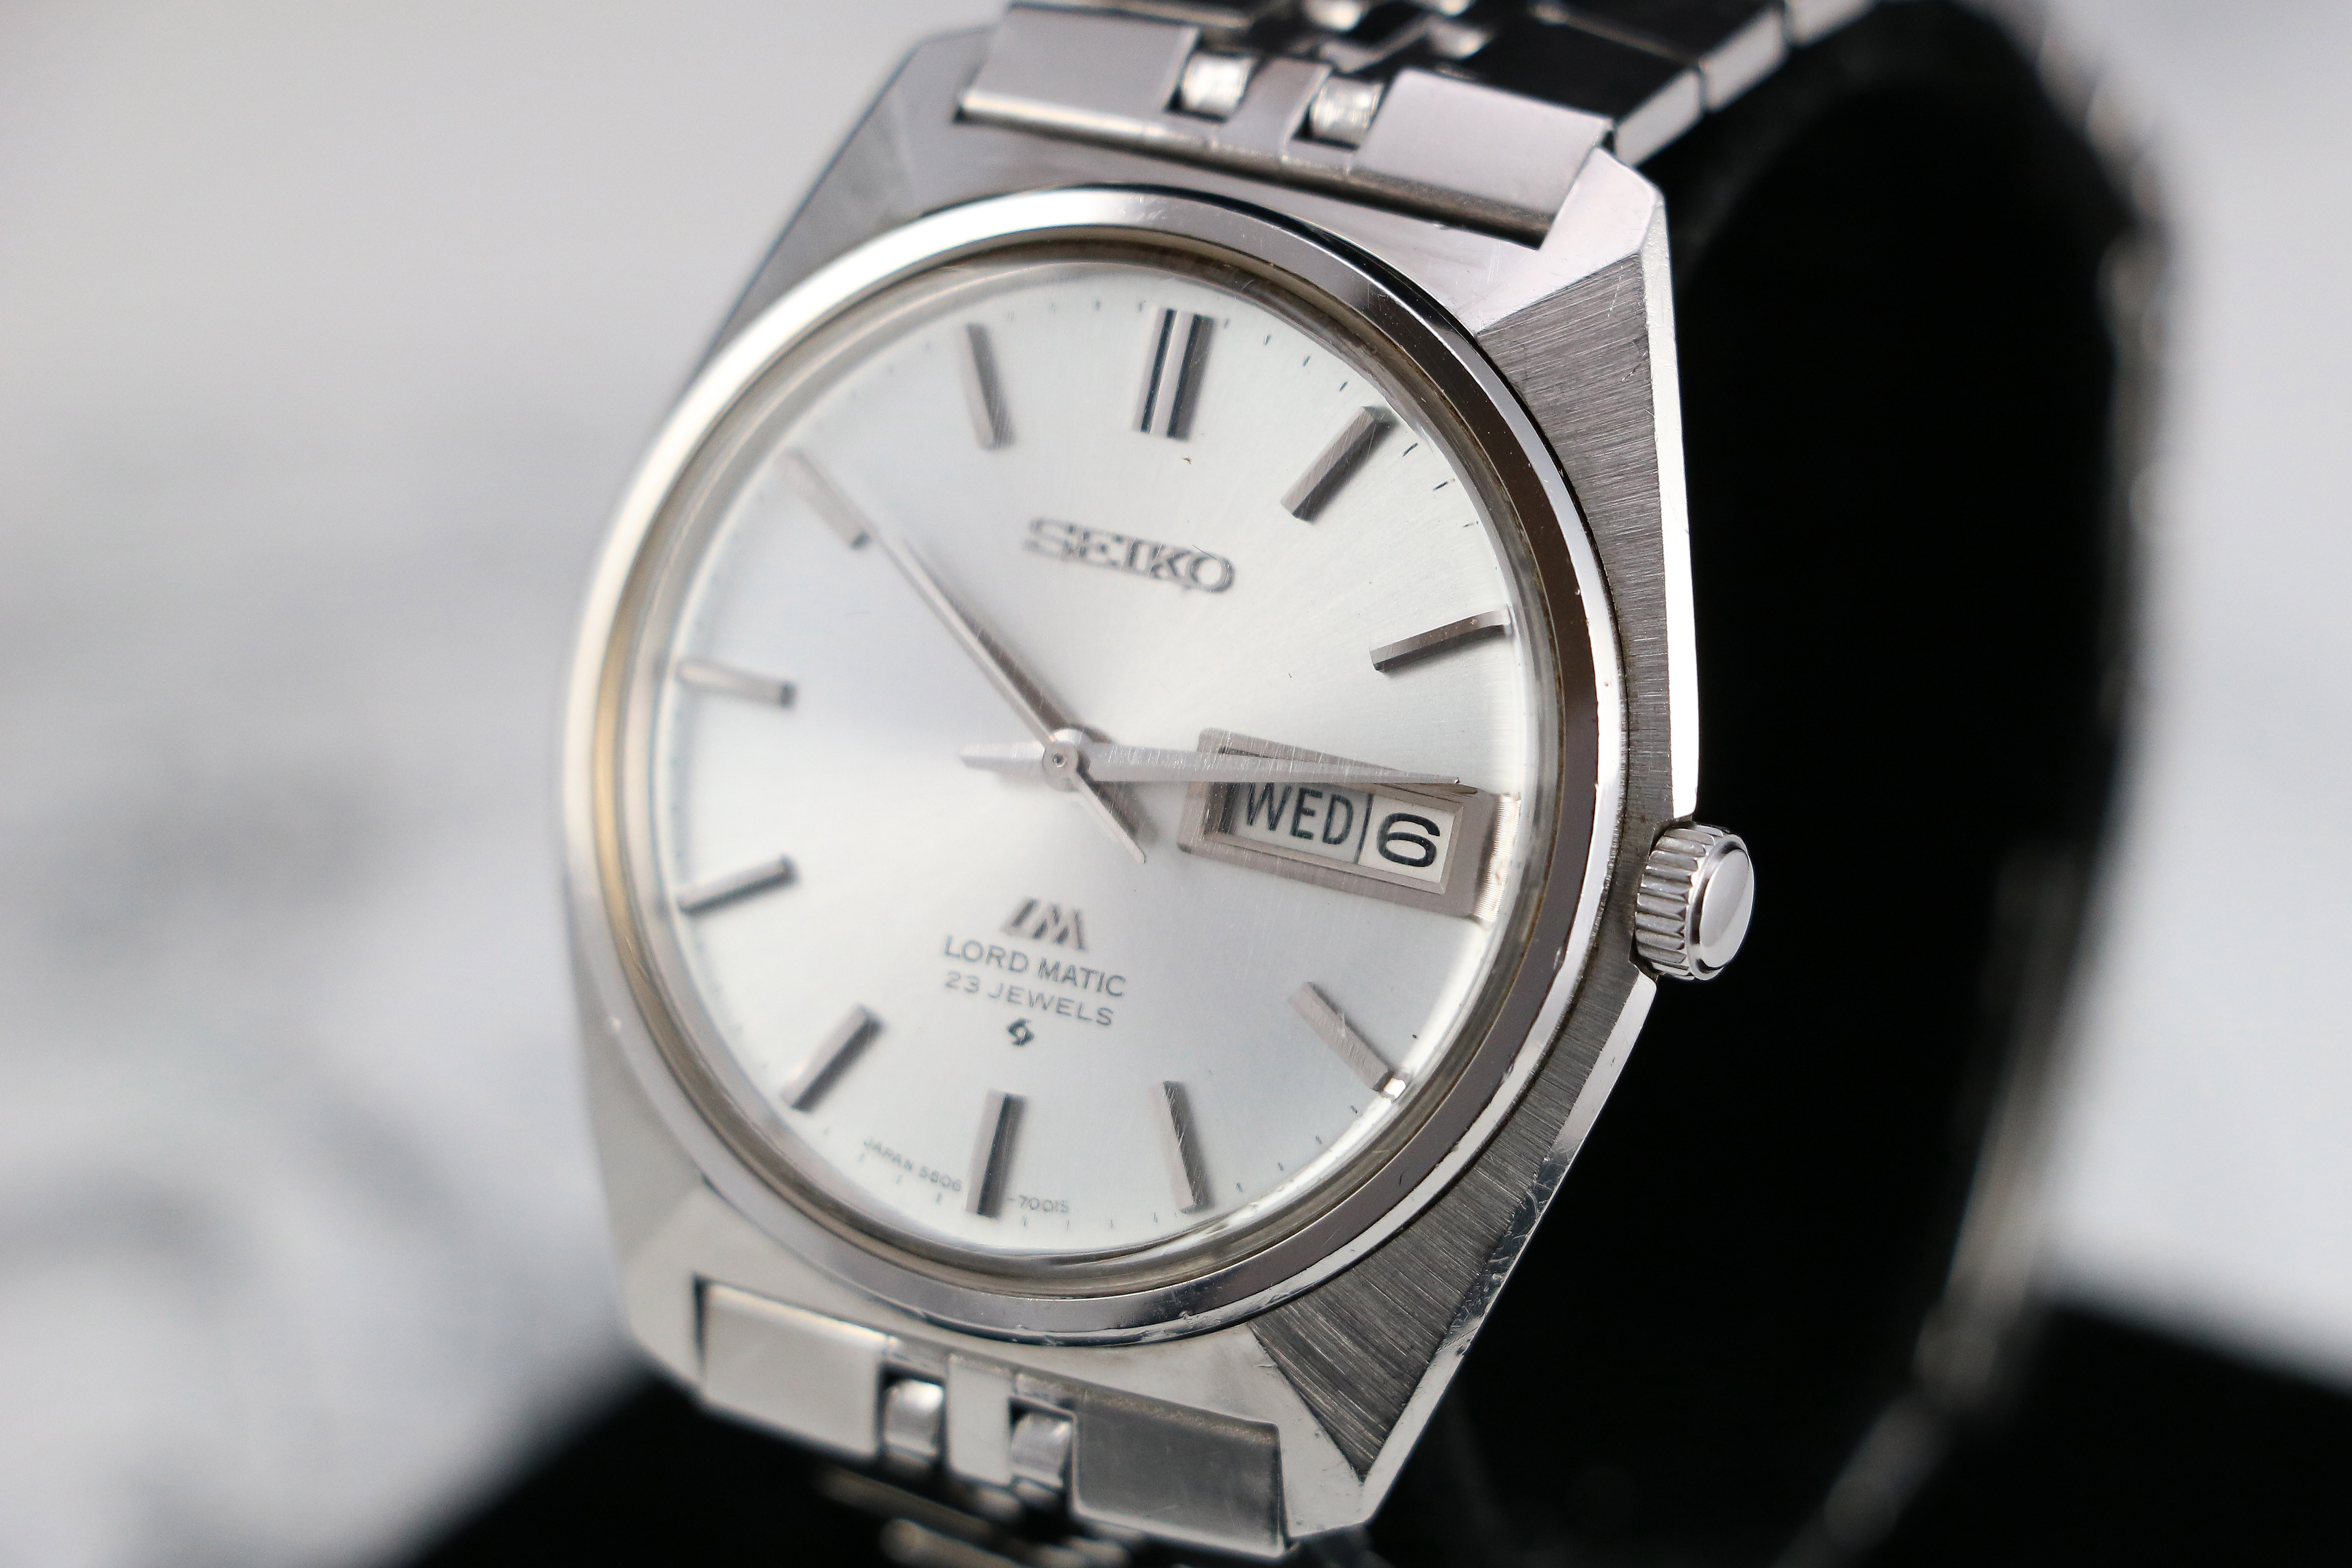 SEIKO LORD MATIC 5606 - 7000 | KANJI DIAL | 1968 | STEEL • Vintage Watches  For Sale - Certified Authentic - Stetz & Co.